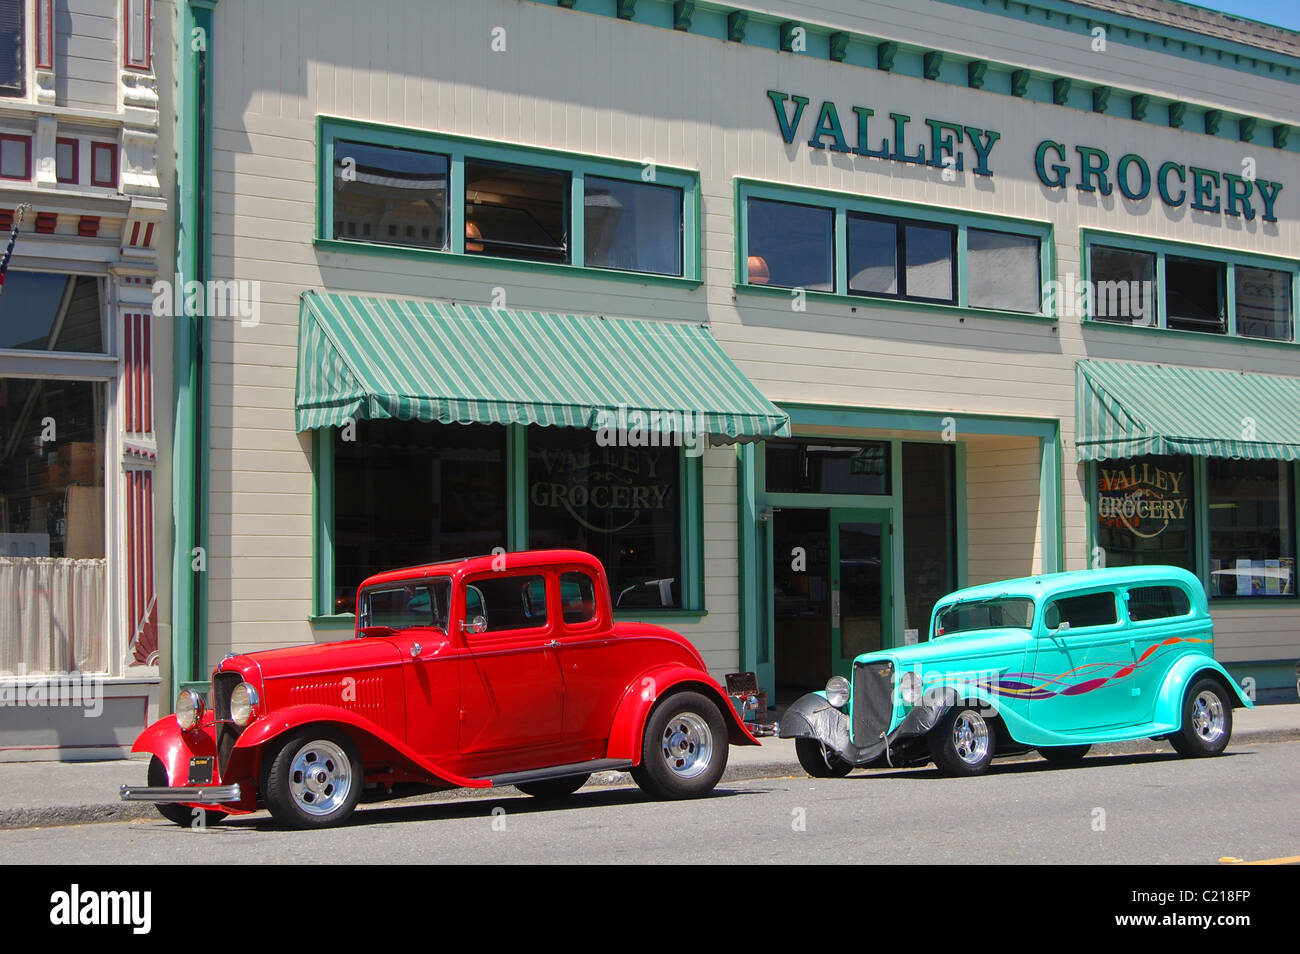 vintage cars parked in ferndale town Stock Photo